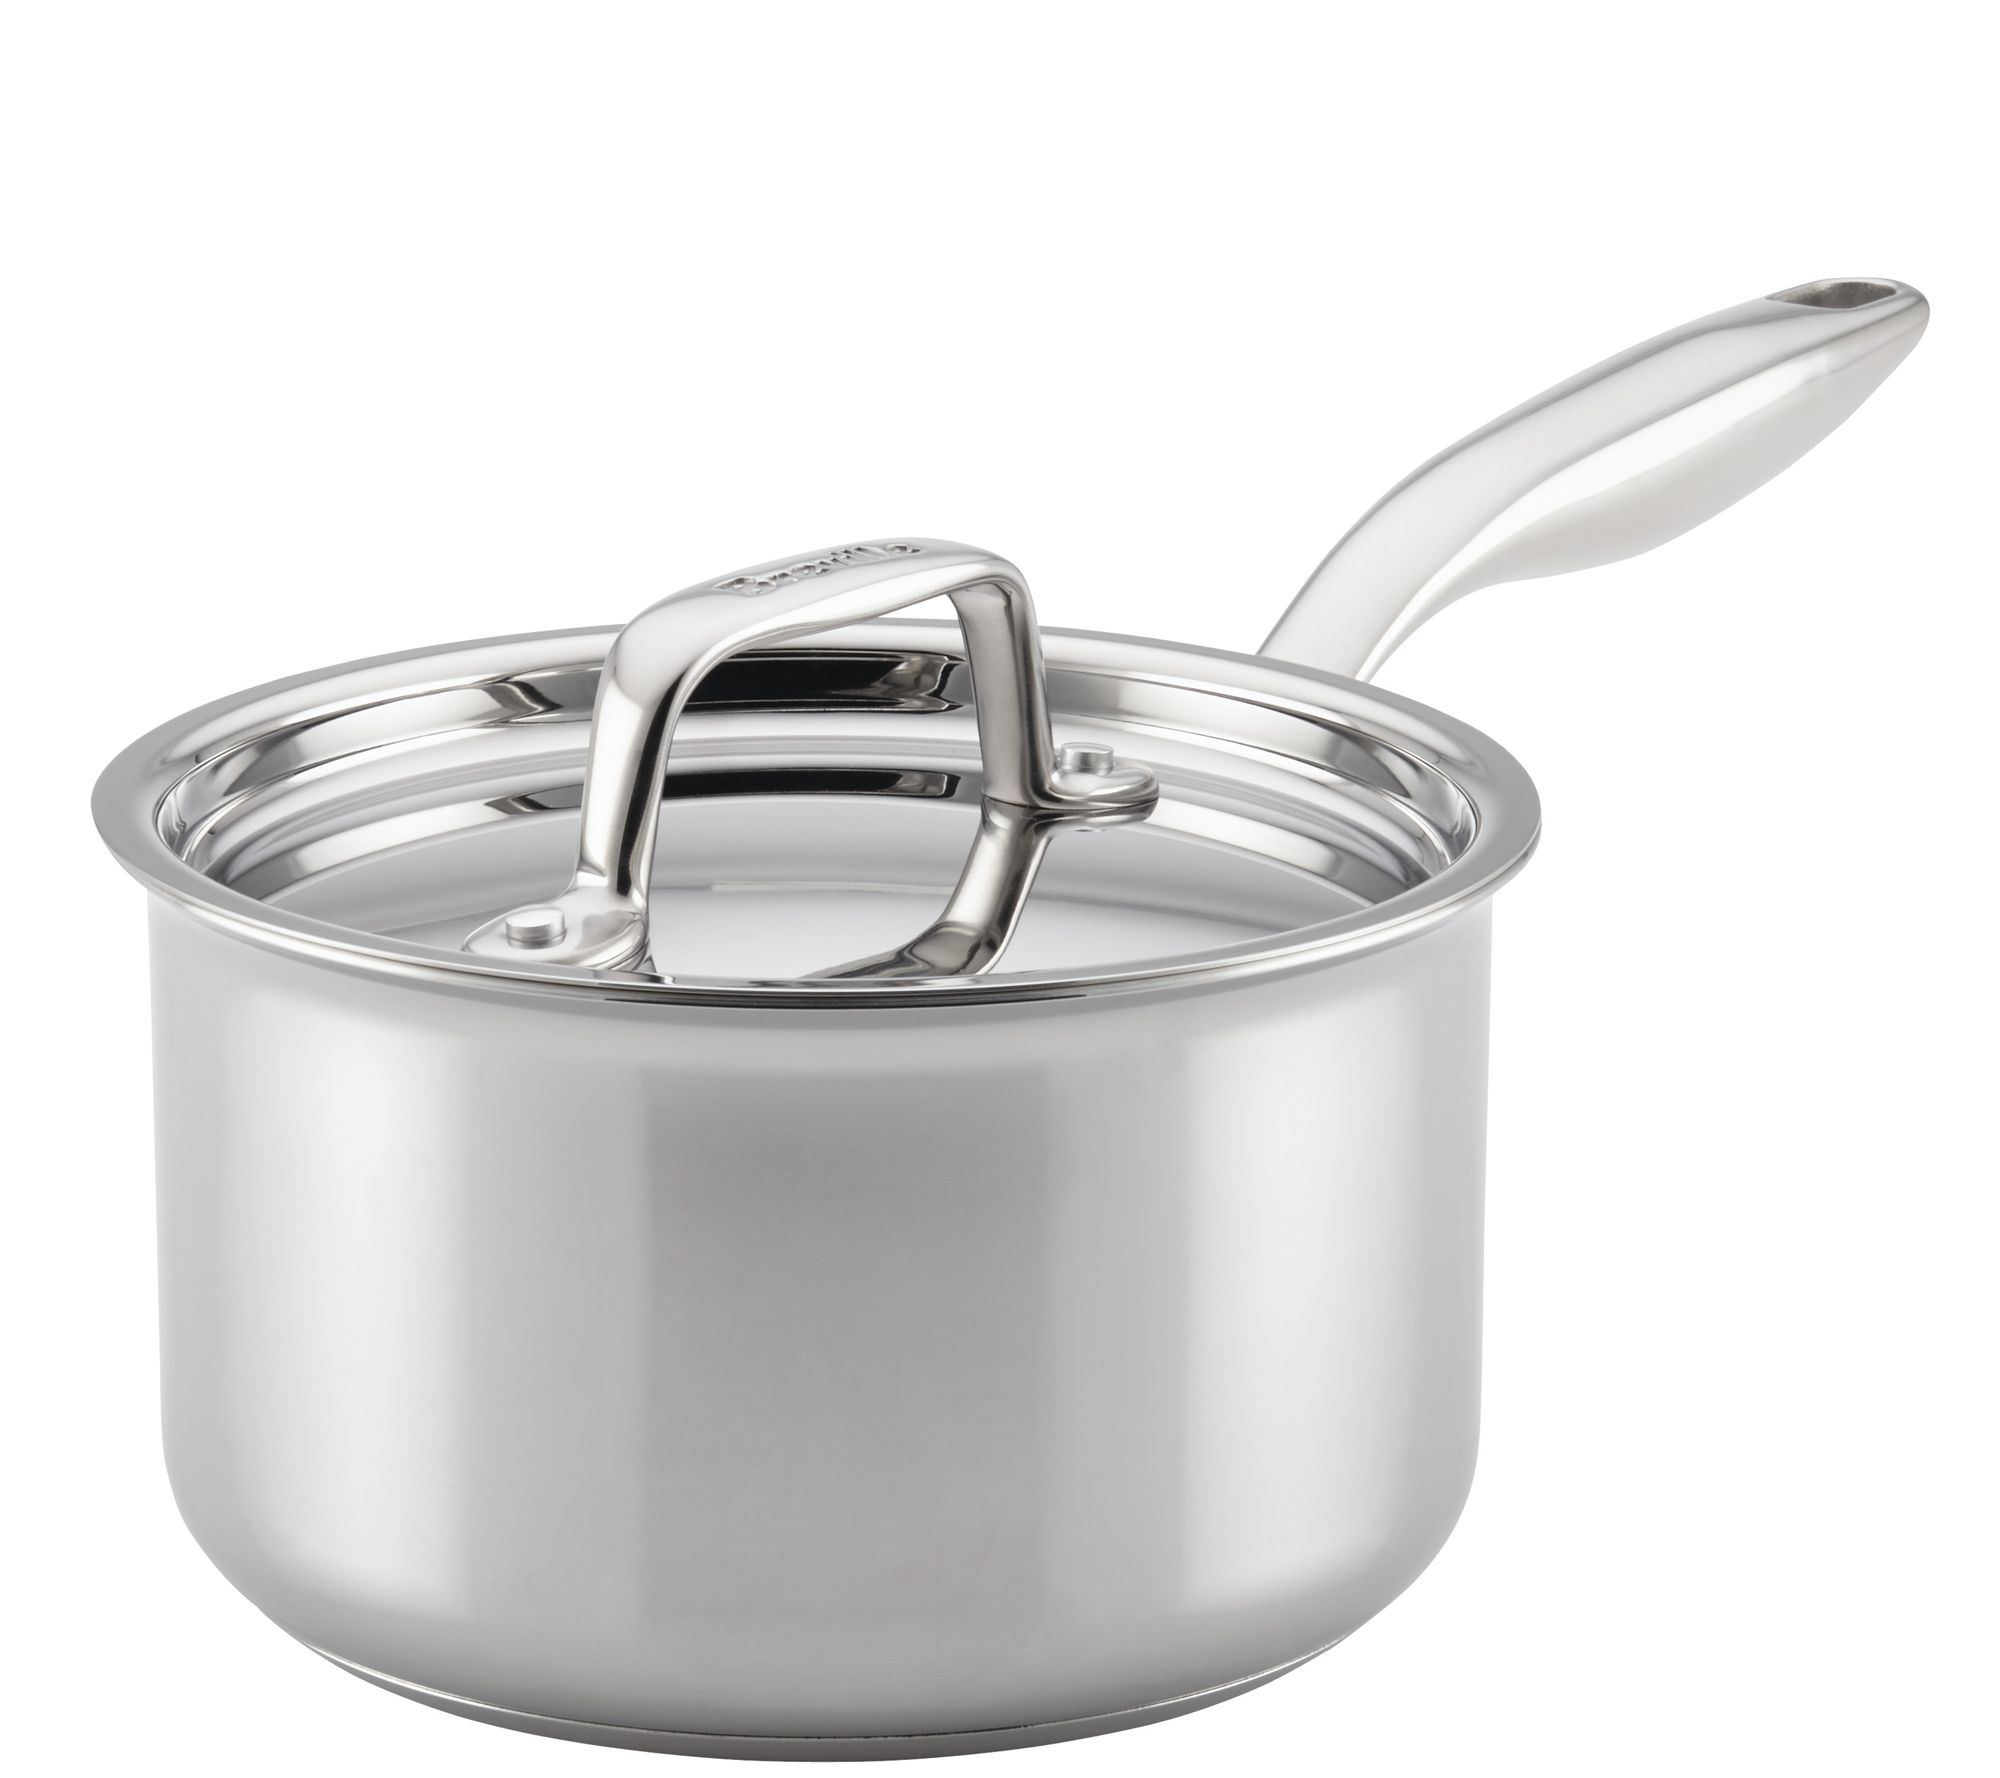 Breville Thermal Pro Clad Stainless Steel 2-qtSaucepan - QVC.com